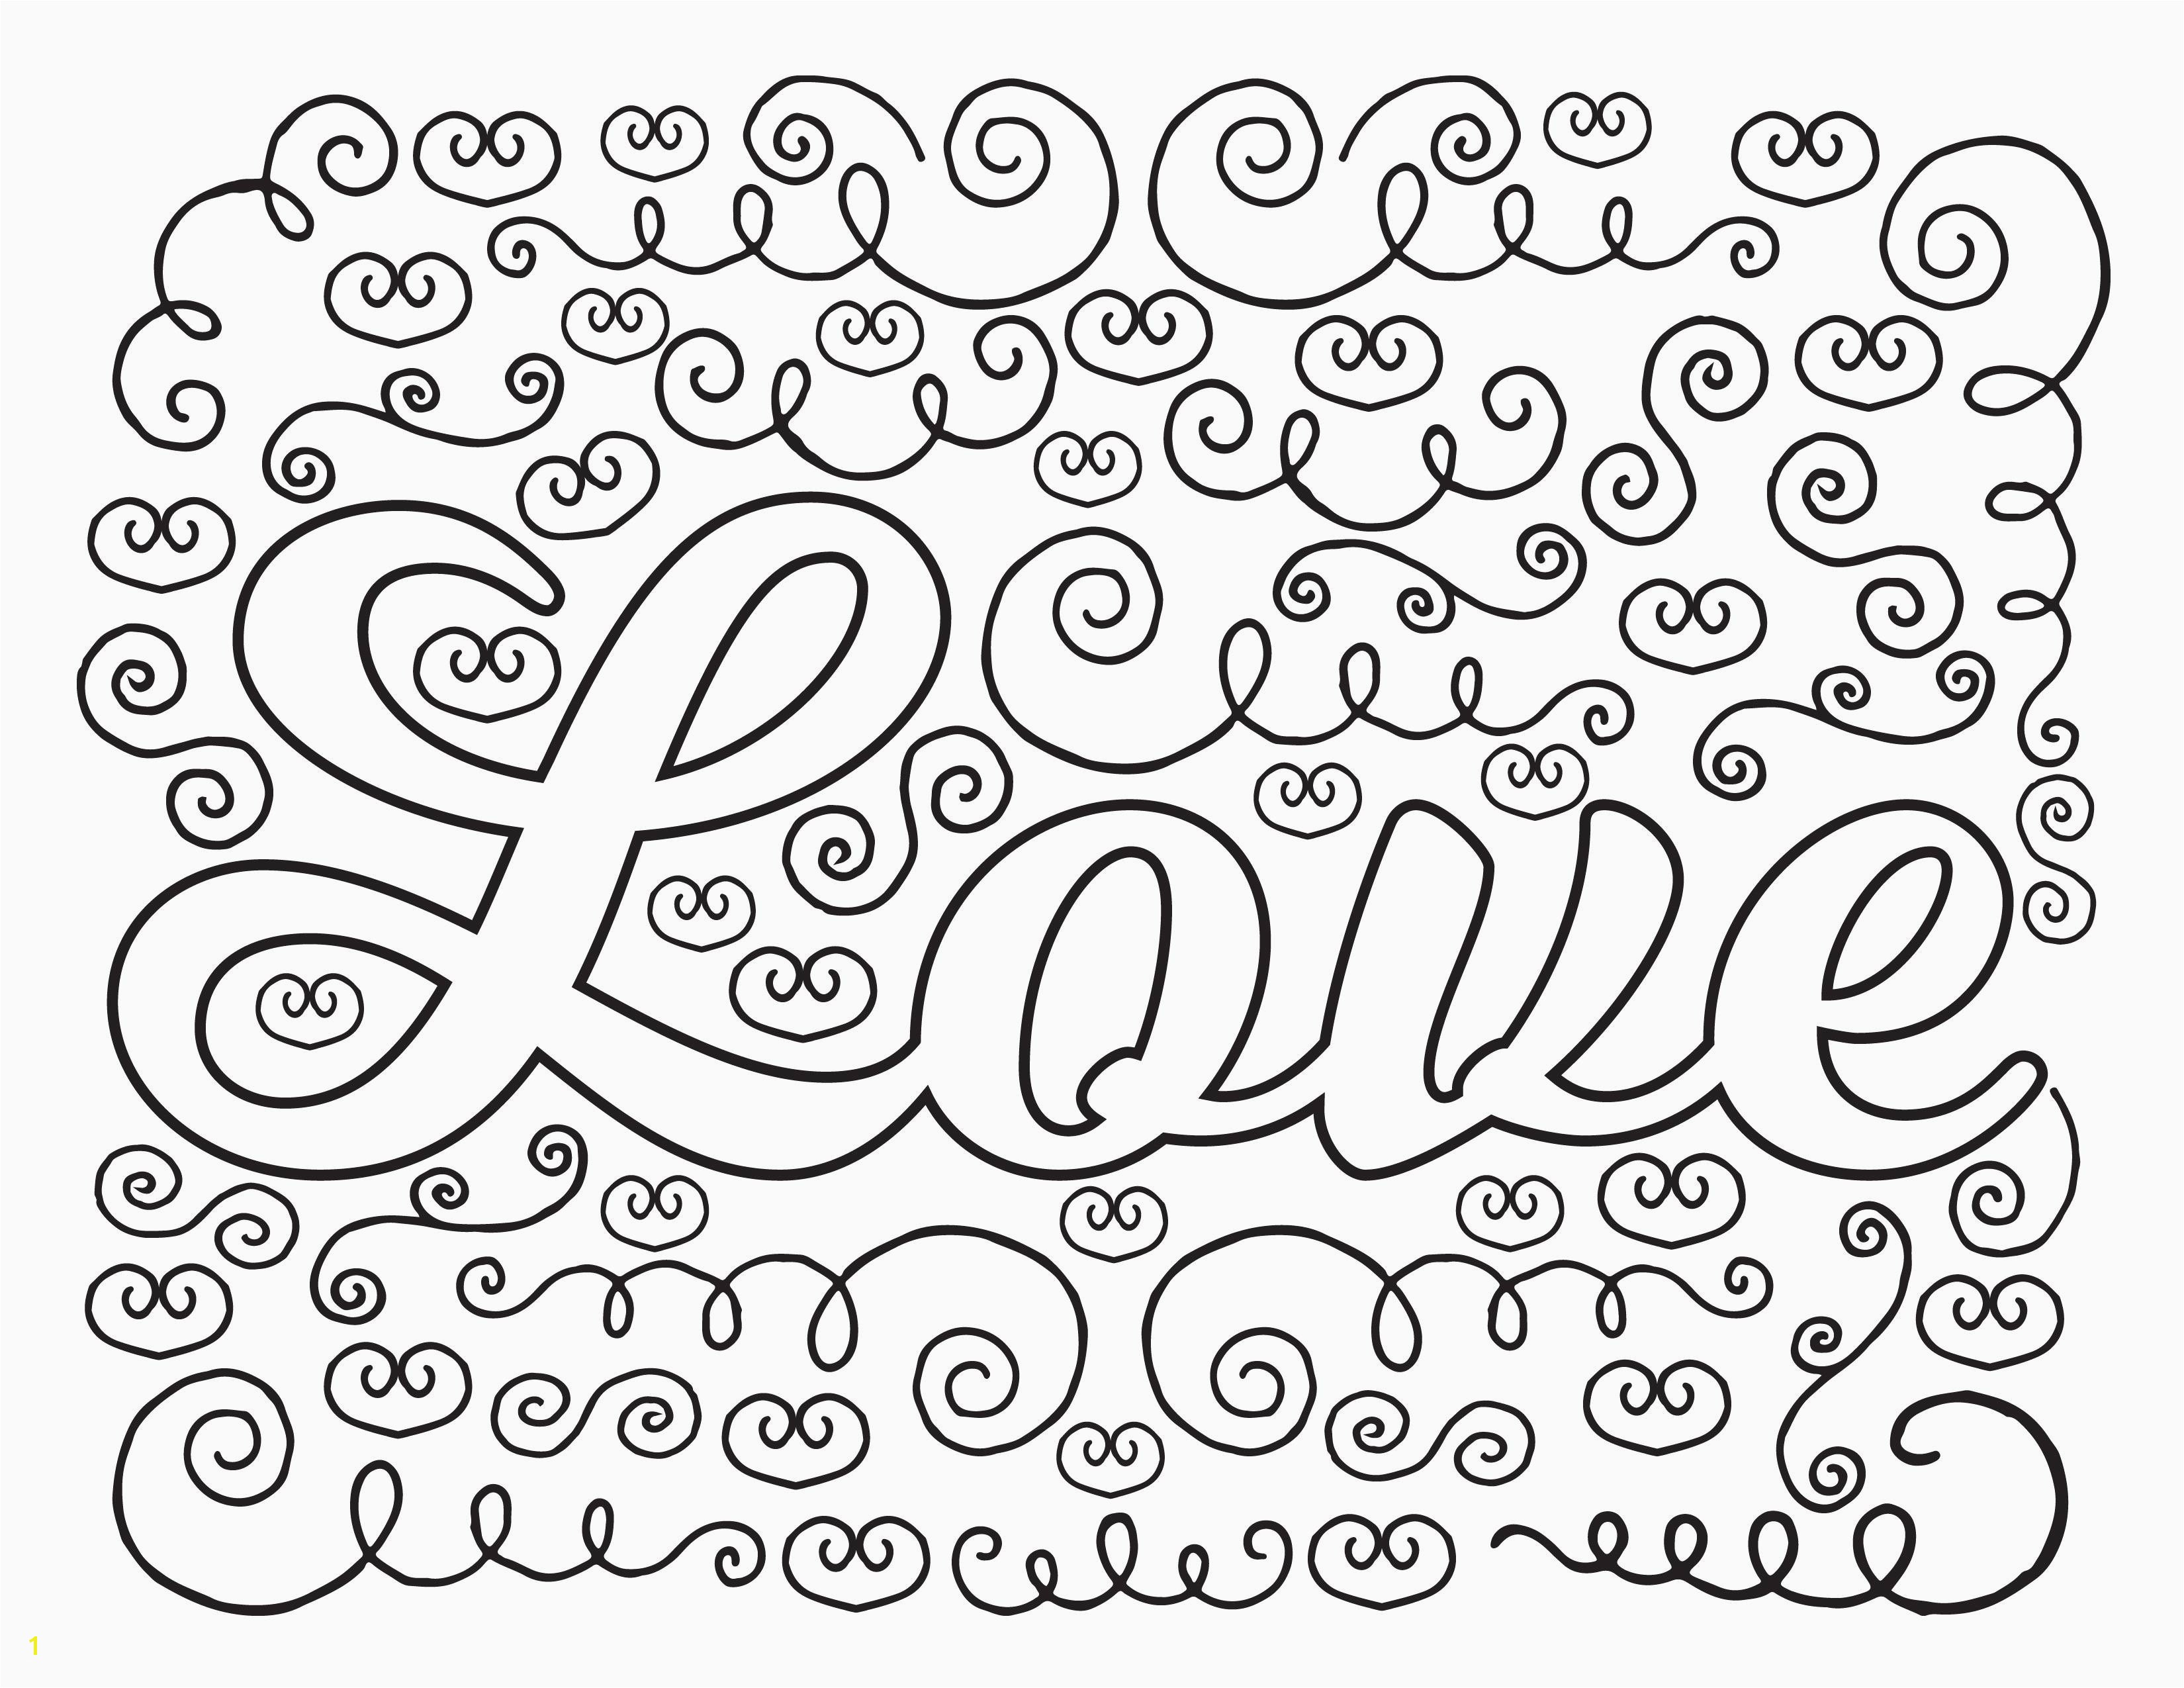 Free Coloring Pages to Print Free Coloring Pages to Print for Kids Free Printable Kids Coloring